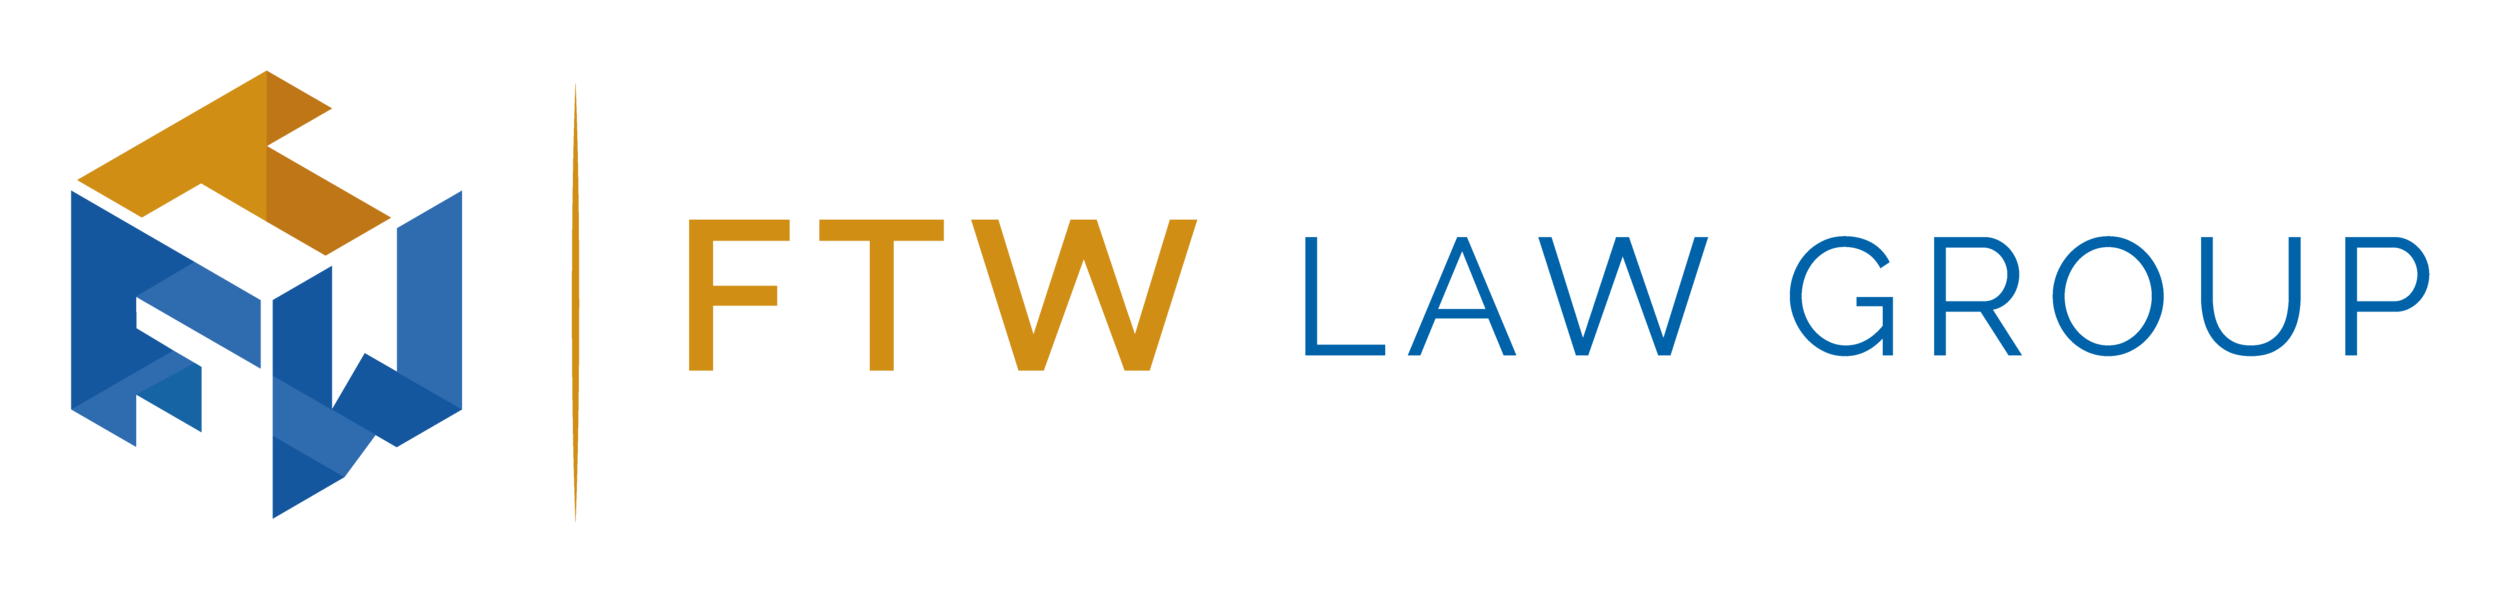 FTW Law Group